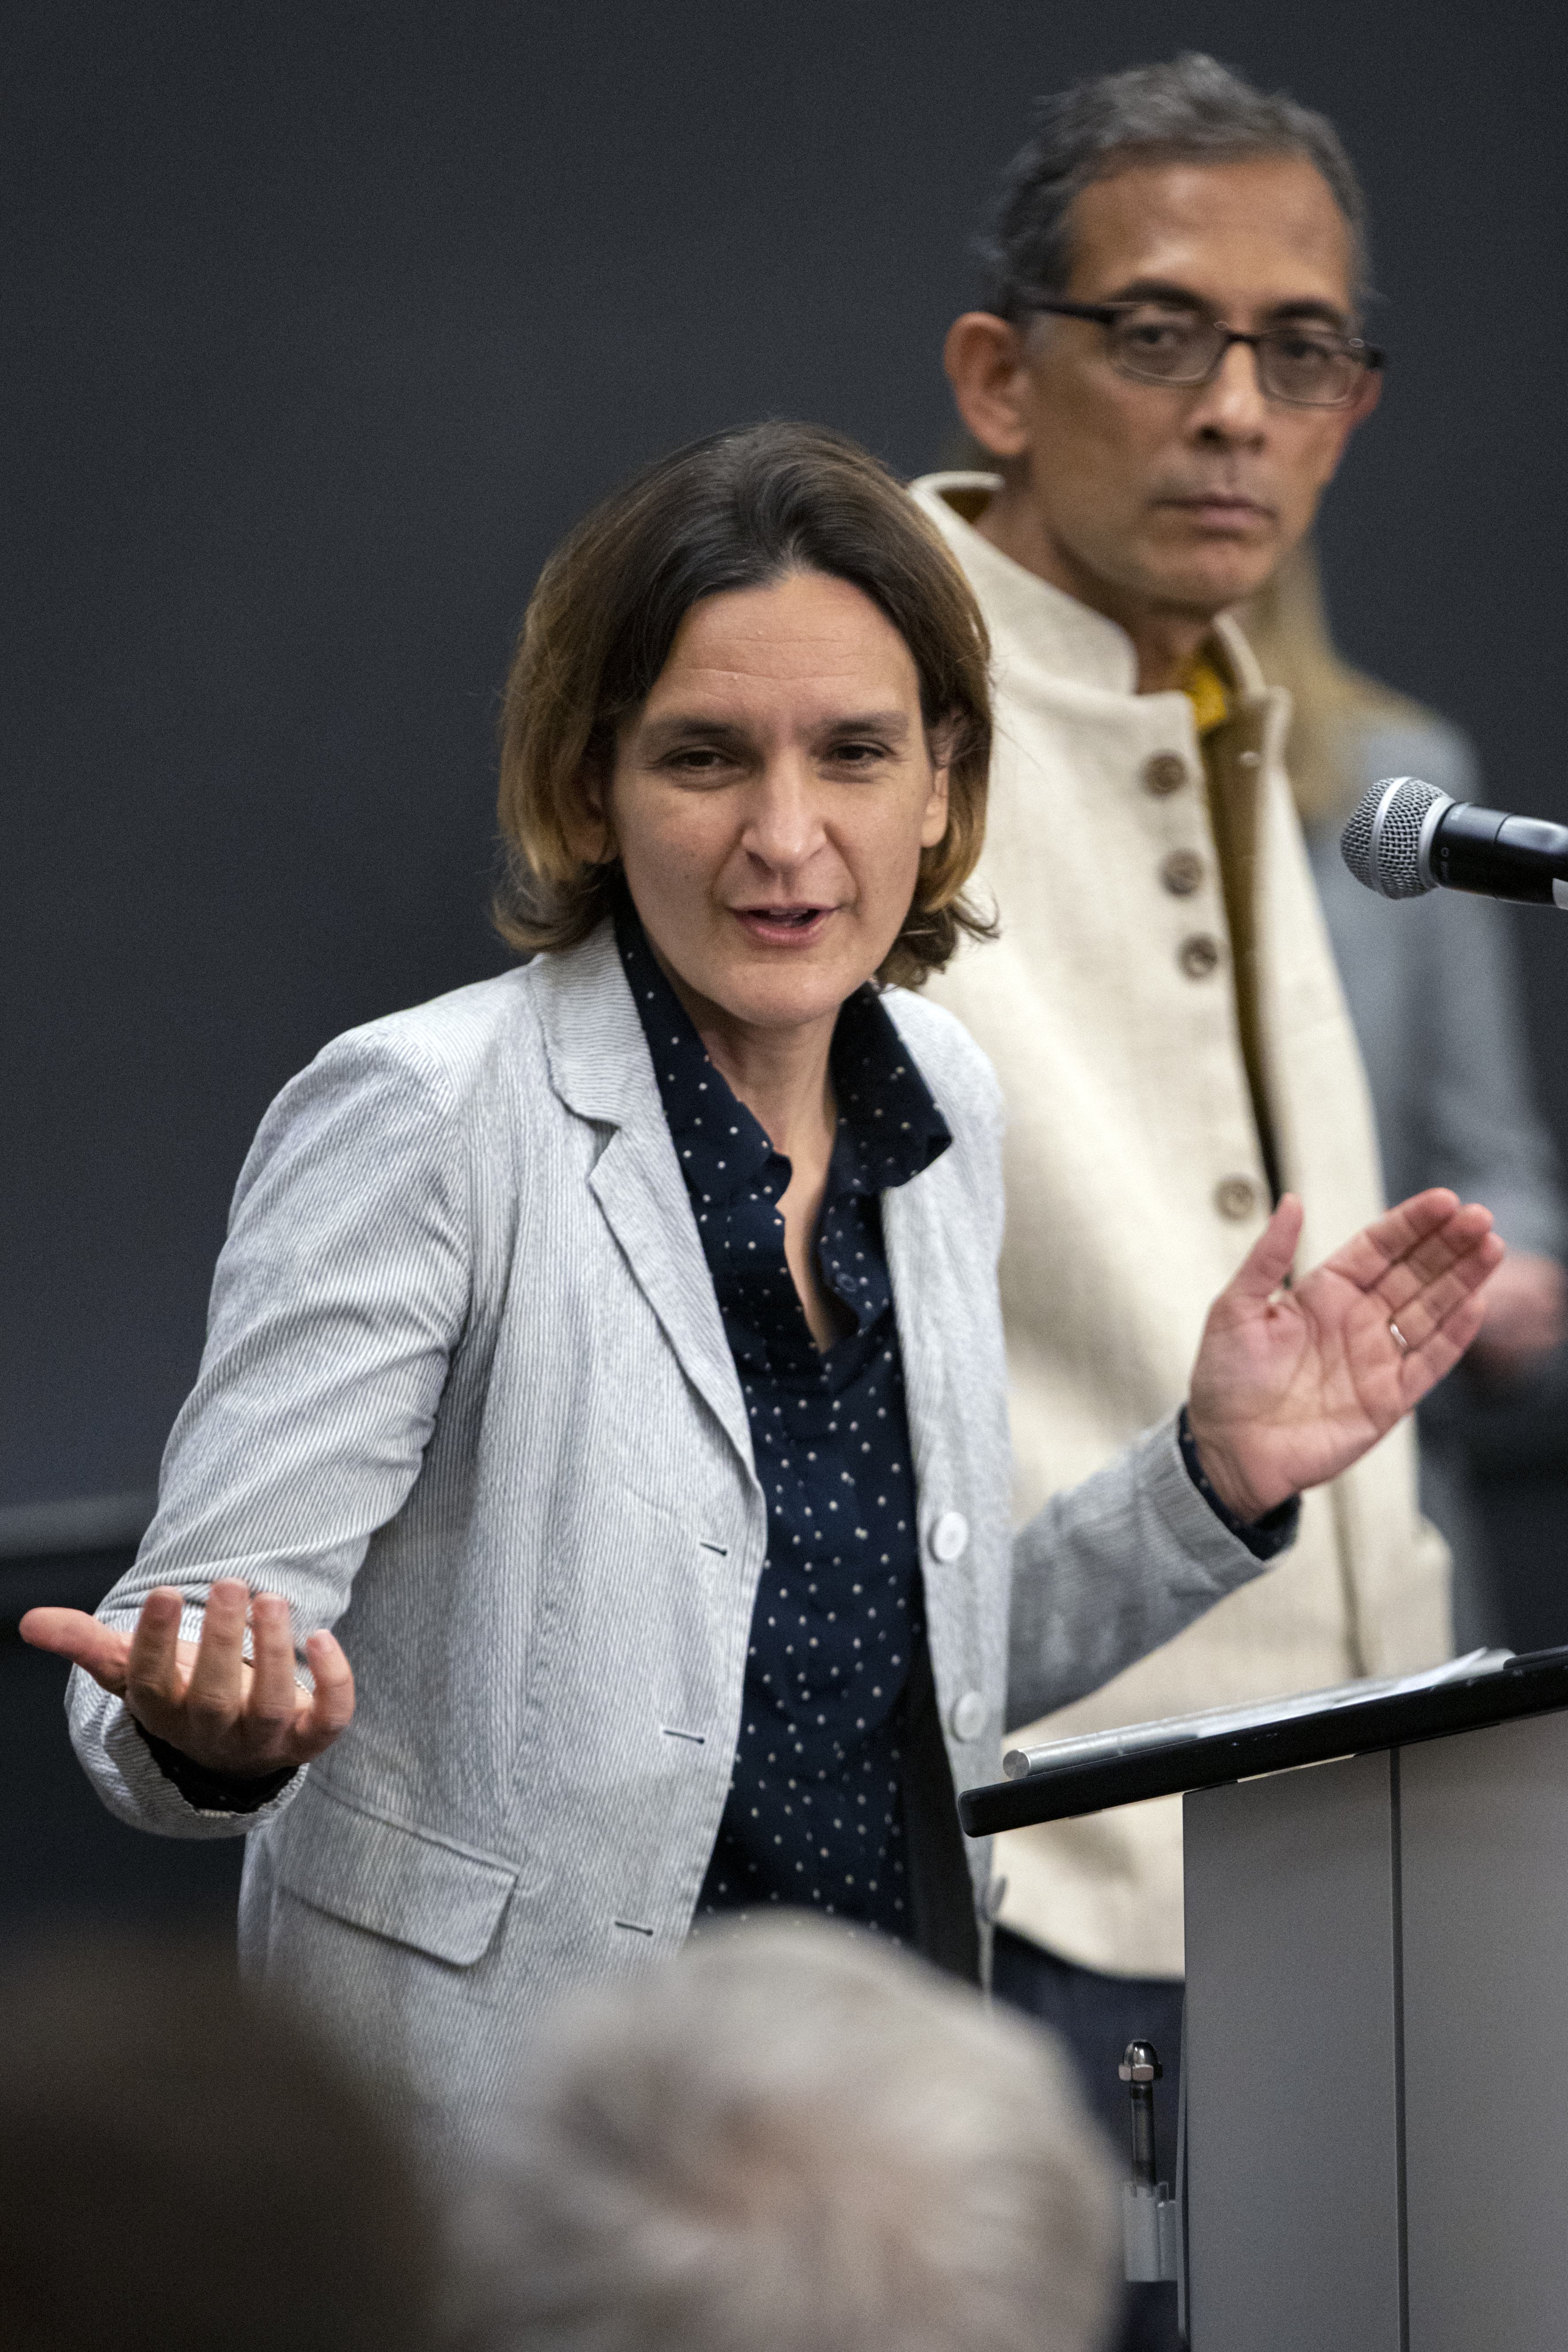 Esther Duflo, left, and Abhijit Banerjee speak during a news conference at Massachusetts Institute of Technology in Cambridge, Mass., Monday, October 14, 2019